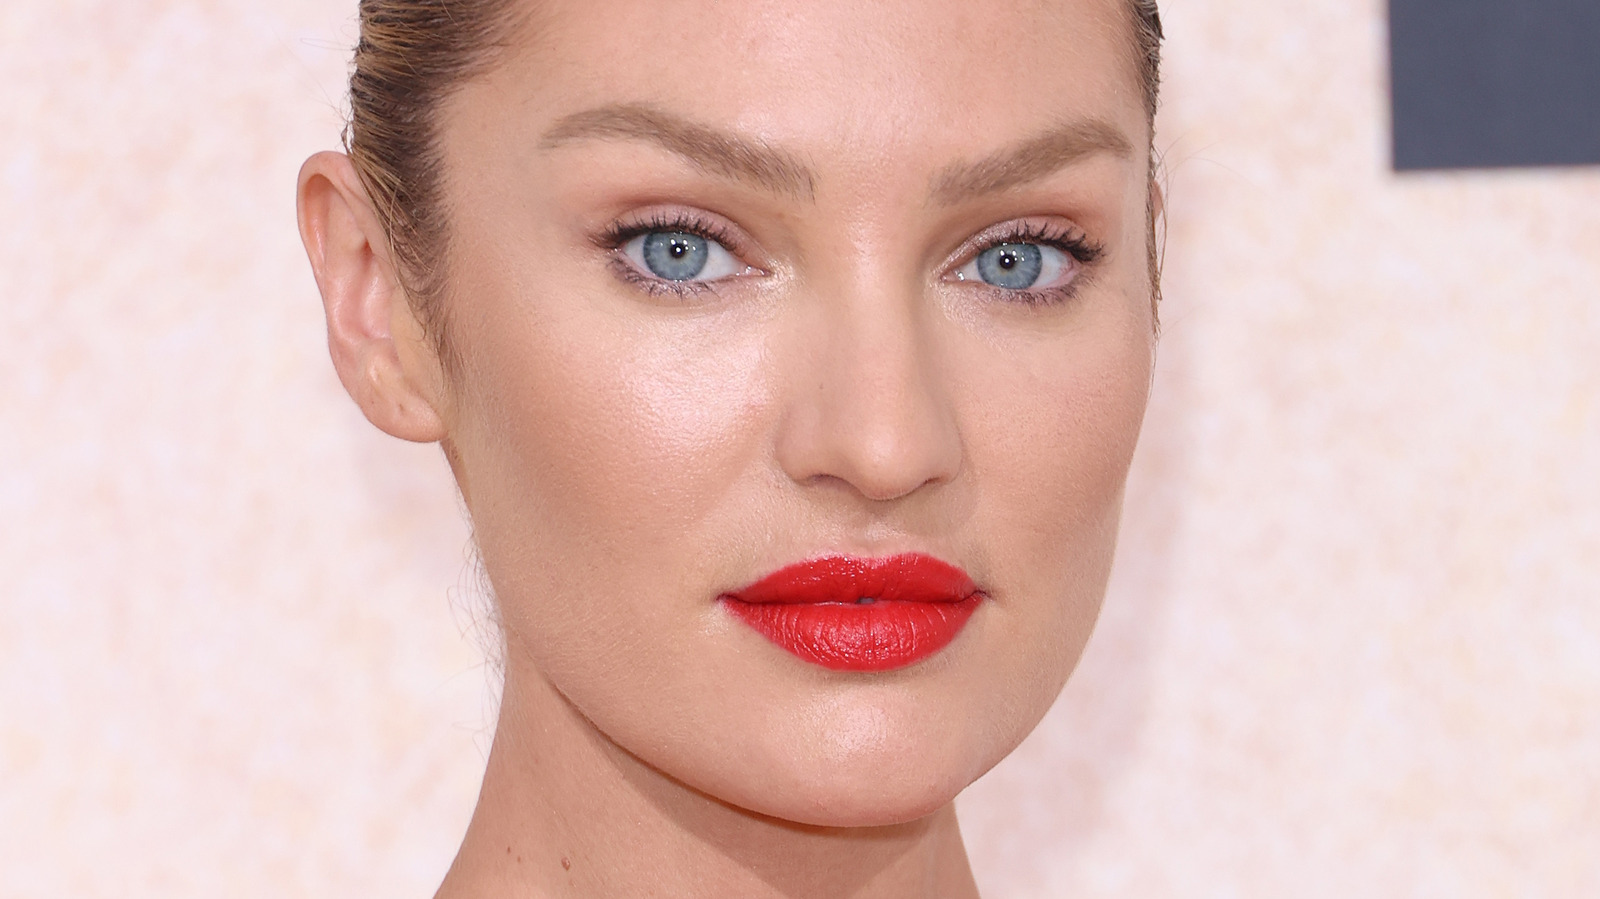 Where Is Supermodel Candice Swanepoel From?